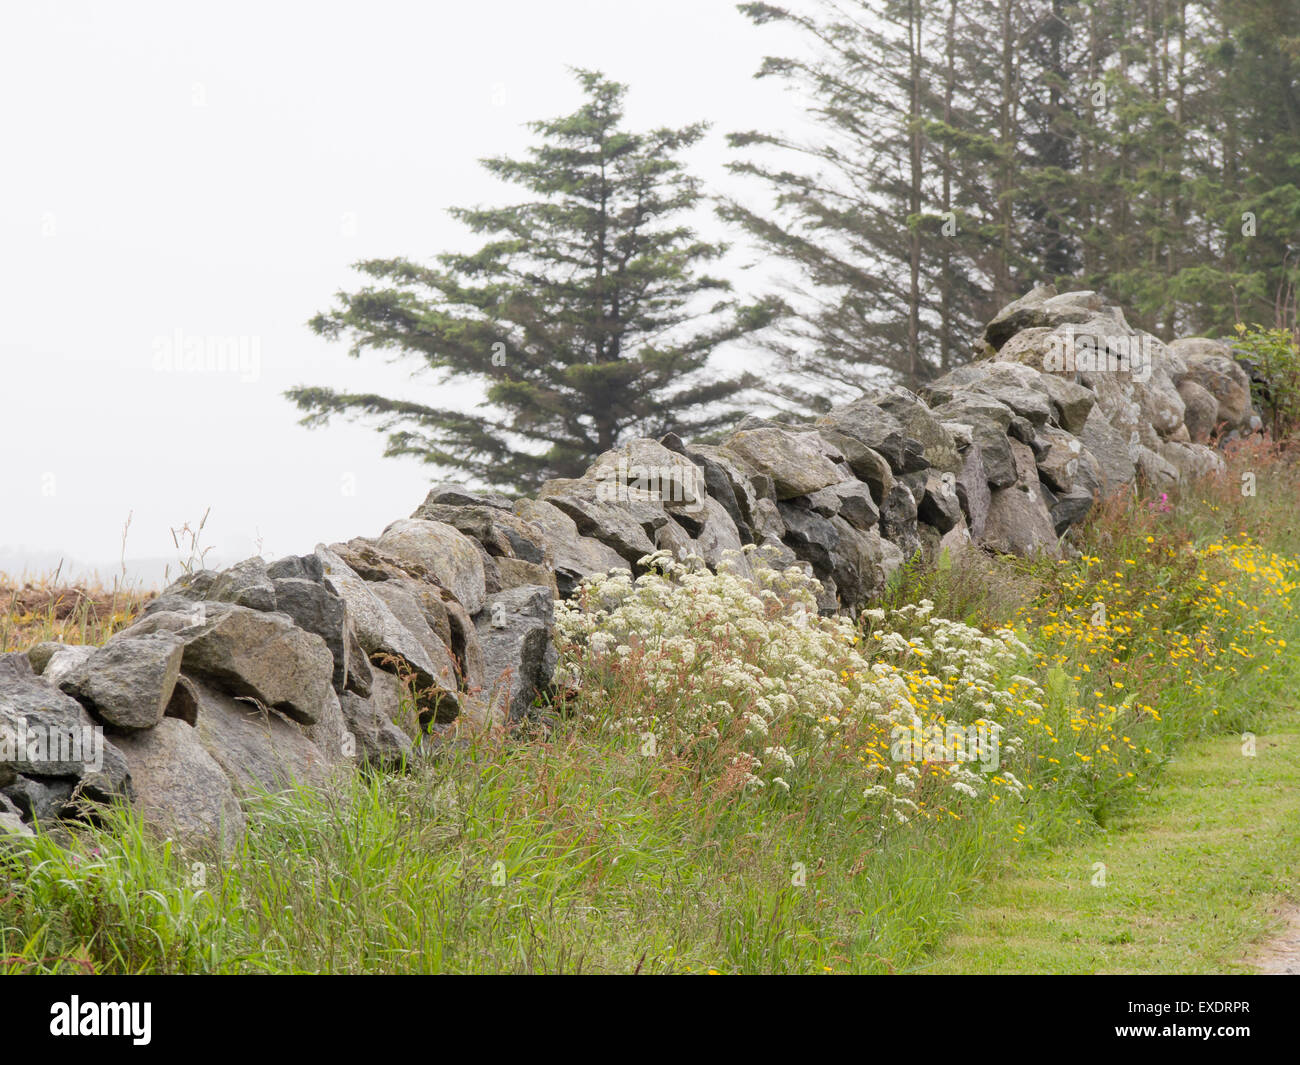 An abundance of stones in their fields make stonewalls the preferred fencing material in the farming district of Jaeren, Norway Stock Photo